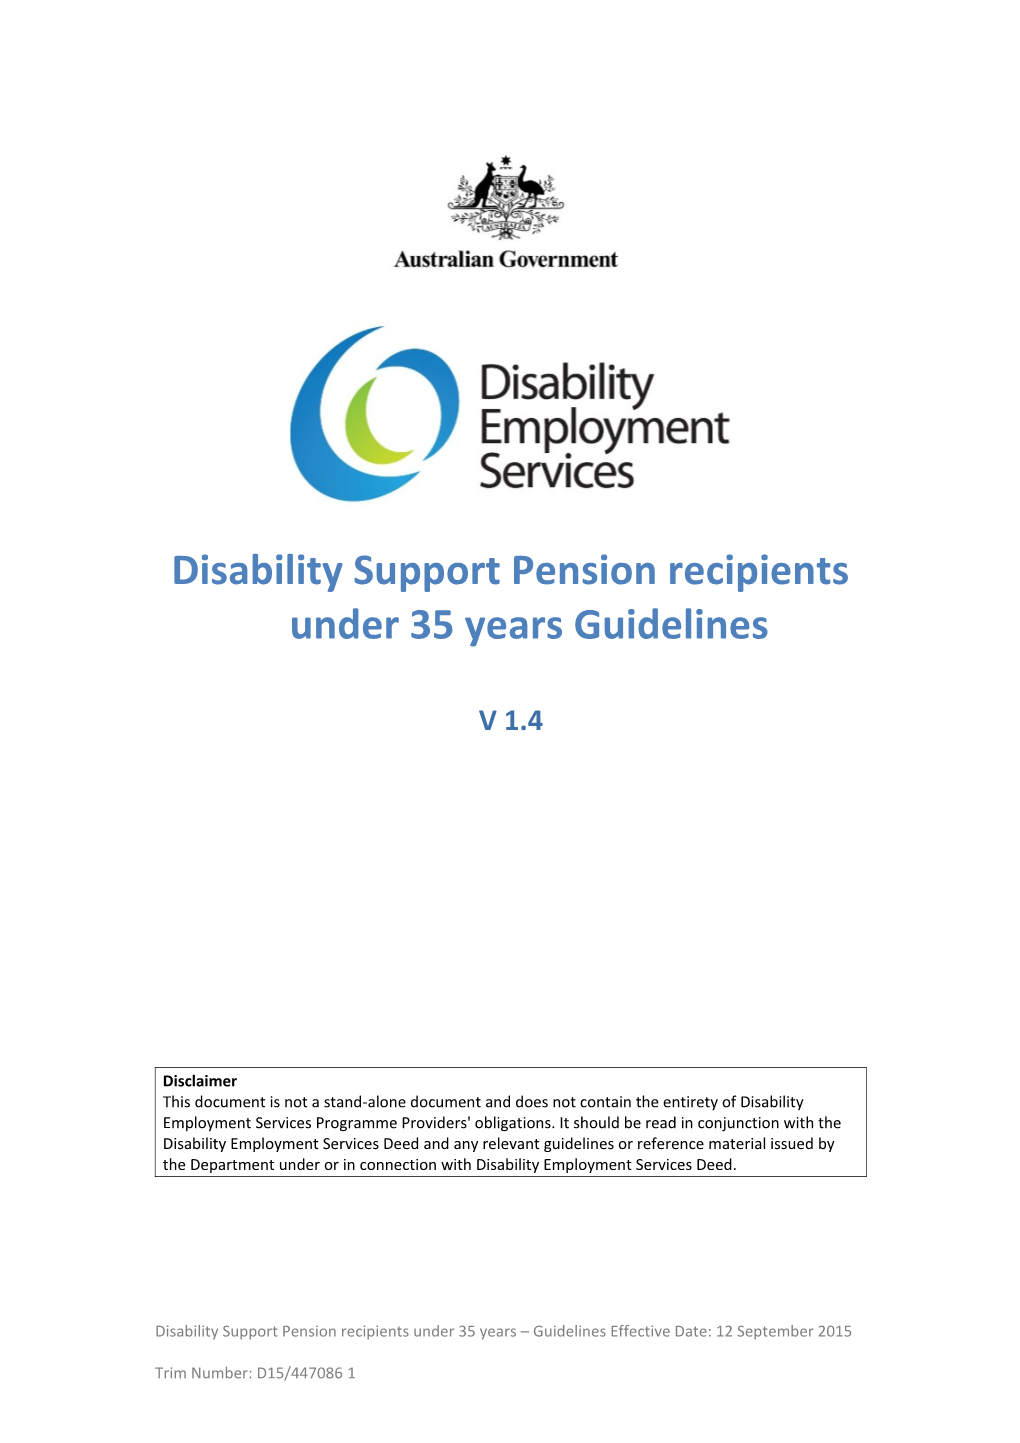 Disability Support Pension Recipients Under 35 Years in DES Guidelines V1.2